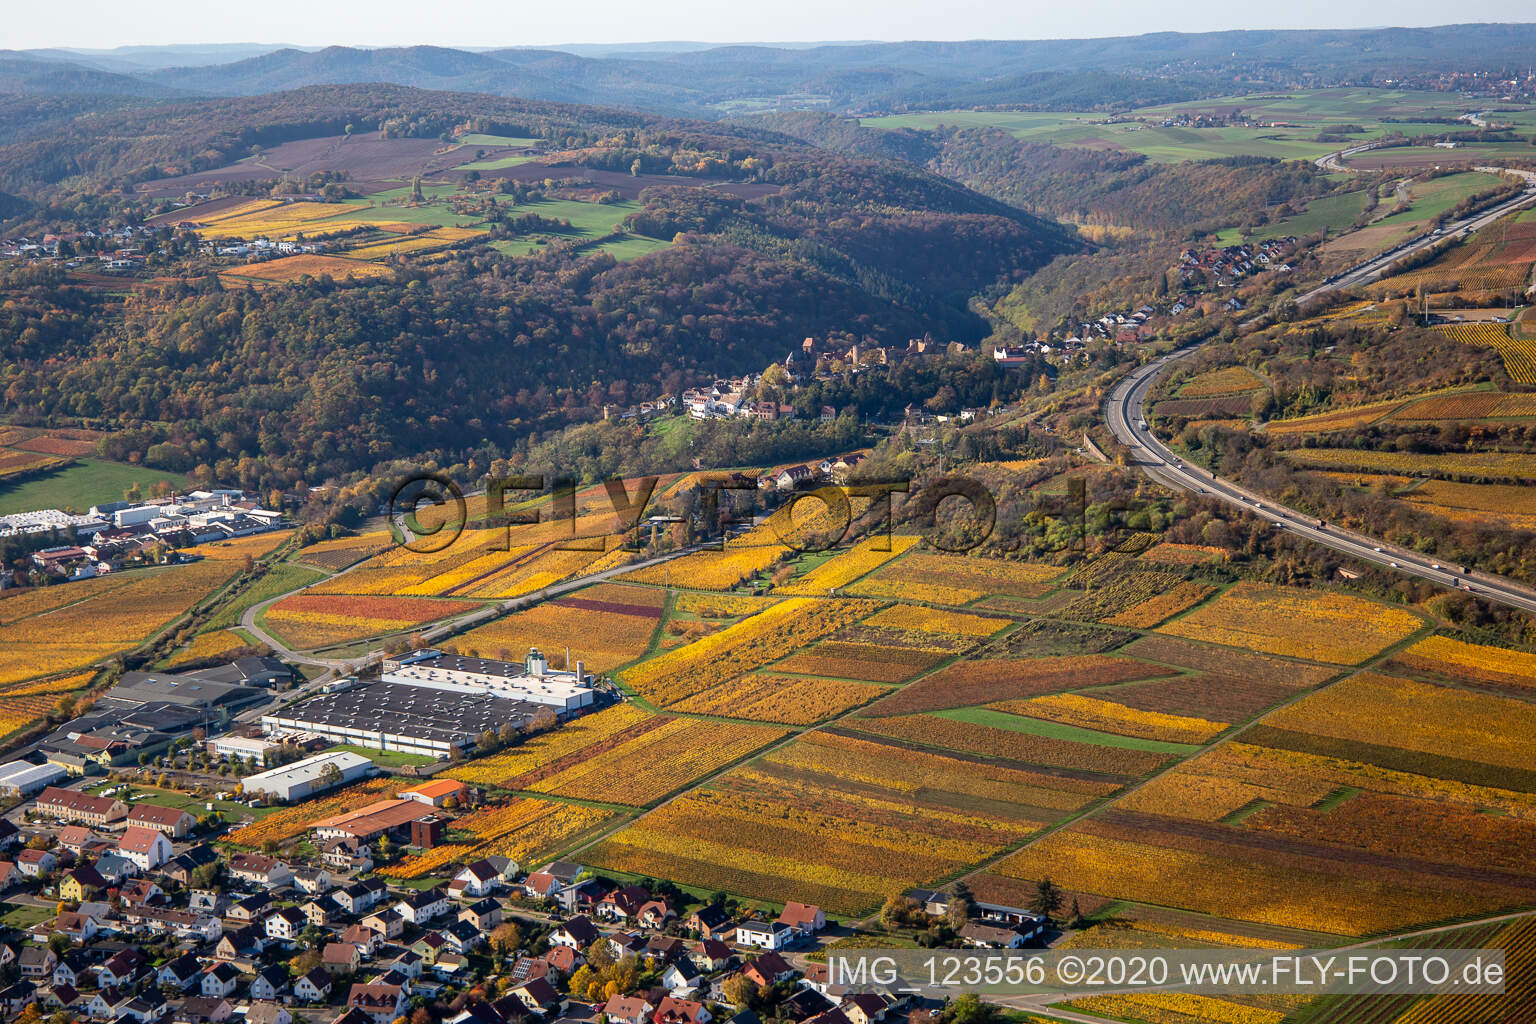 Aerial view of Autumnal discolored vineyards in the wine-growing area between Sausenheim and Neuleiningen in the state Rhineland-Palatinate, Germany